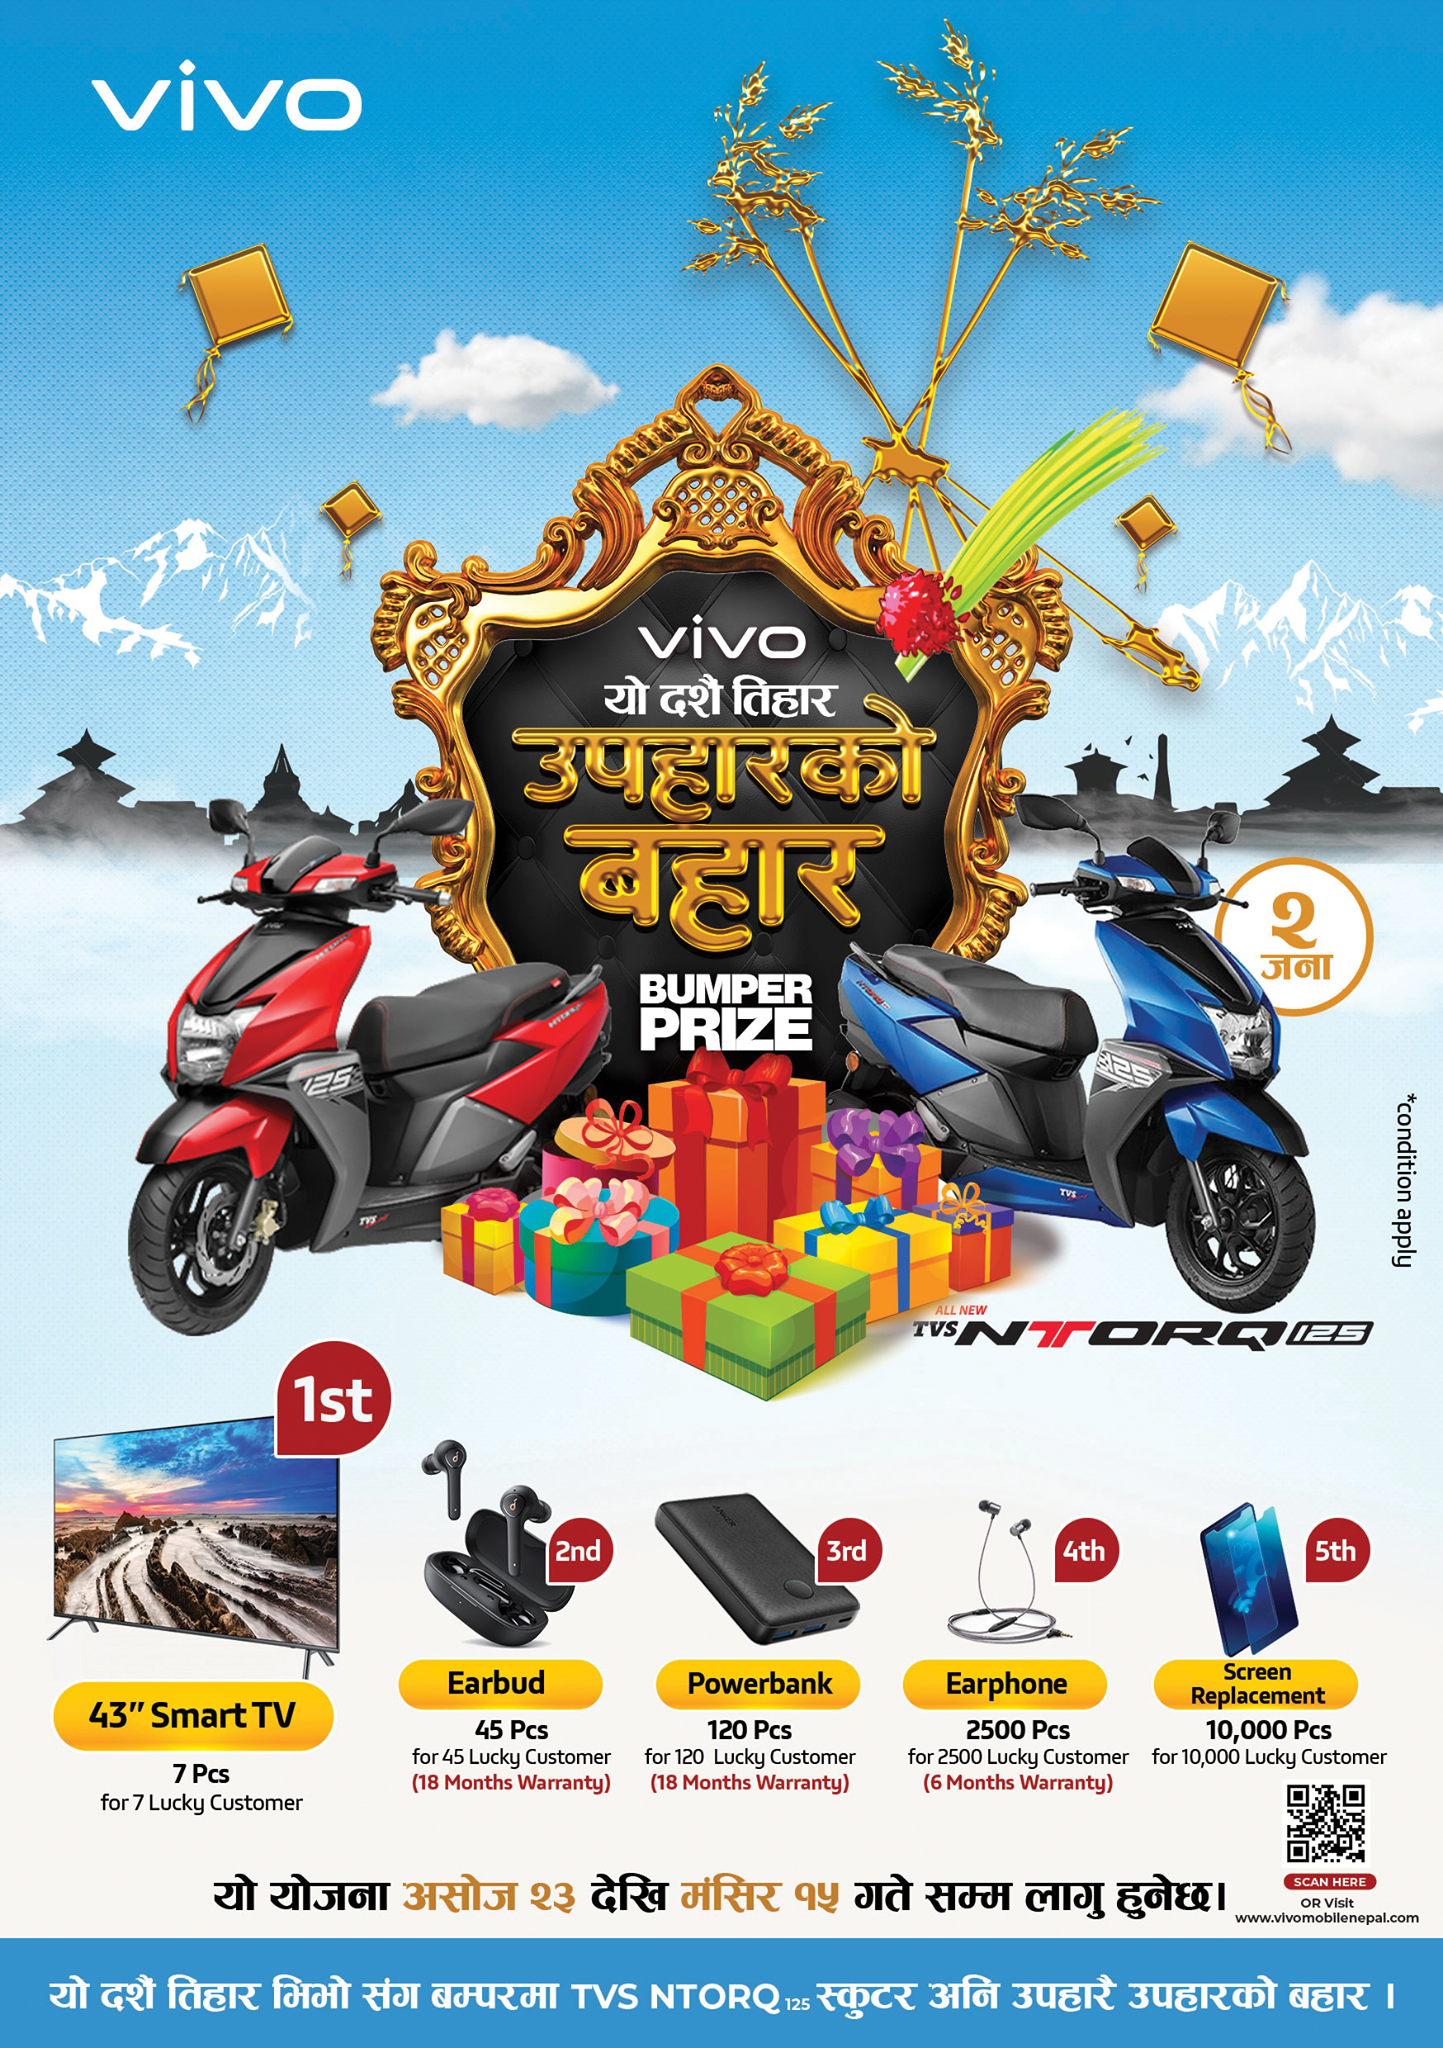 Avail exciting offers with Vivo lucky draw this Dashain